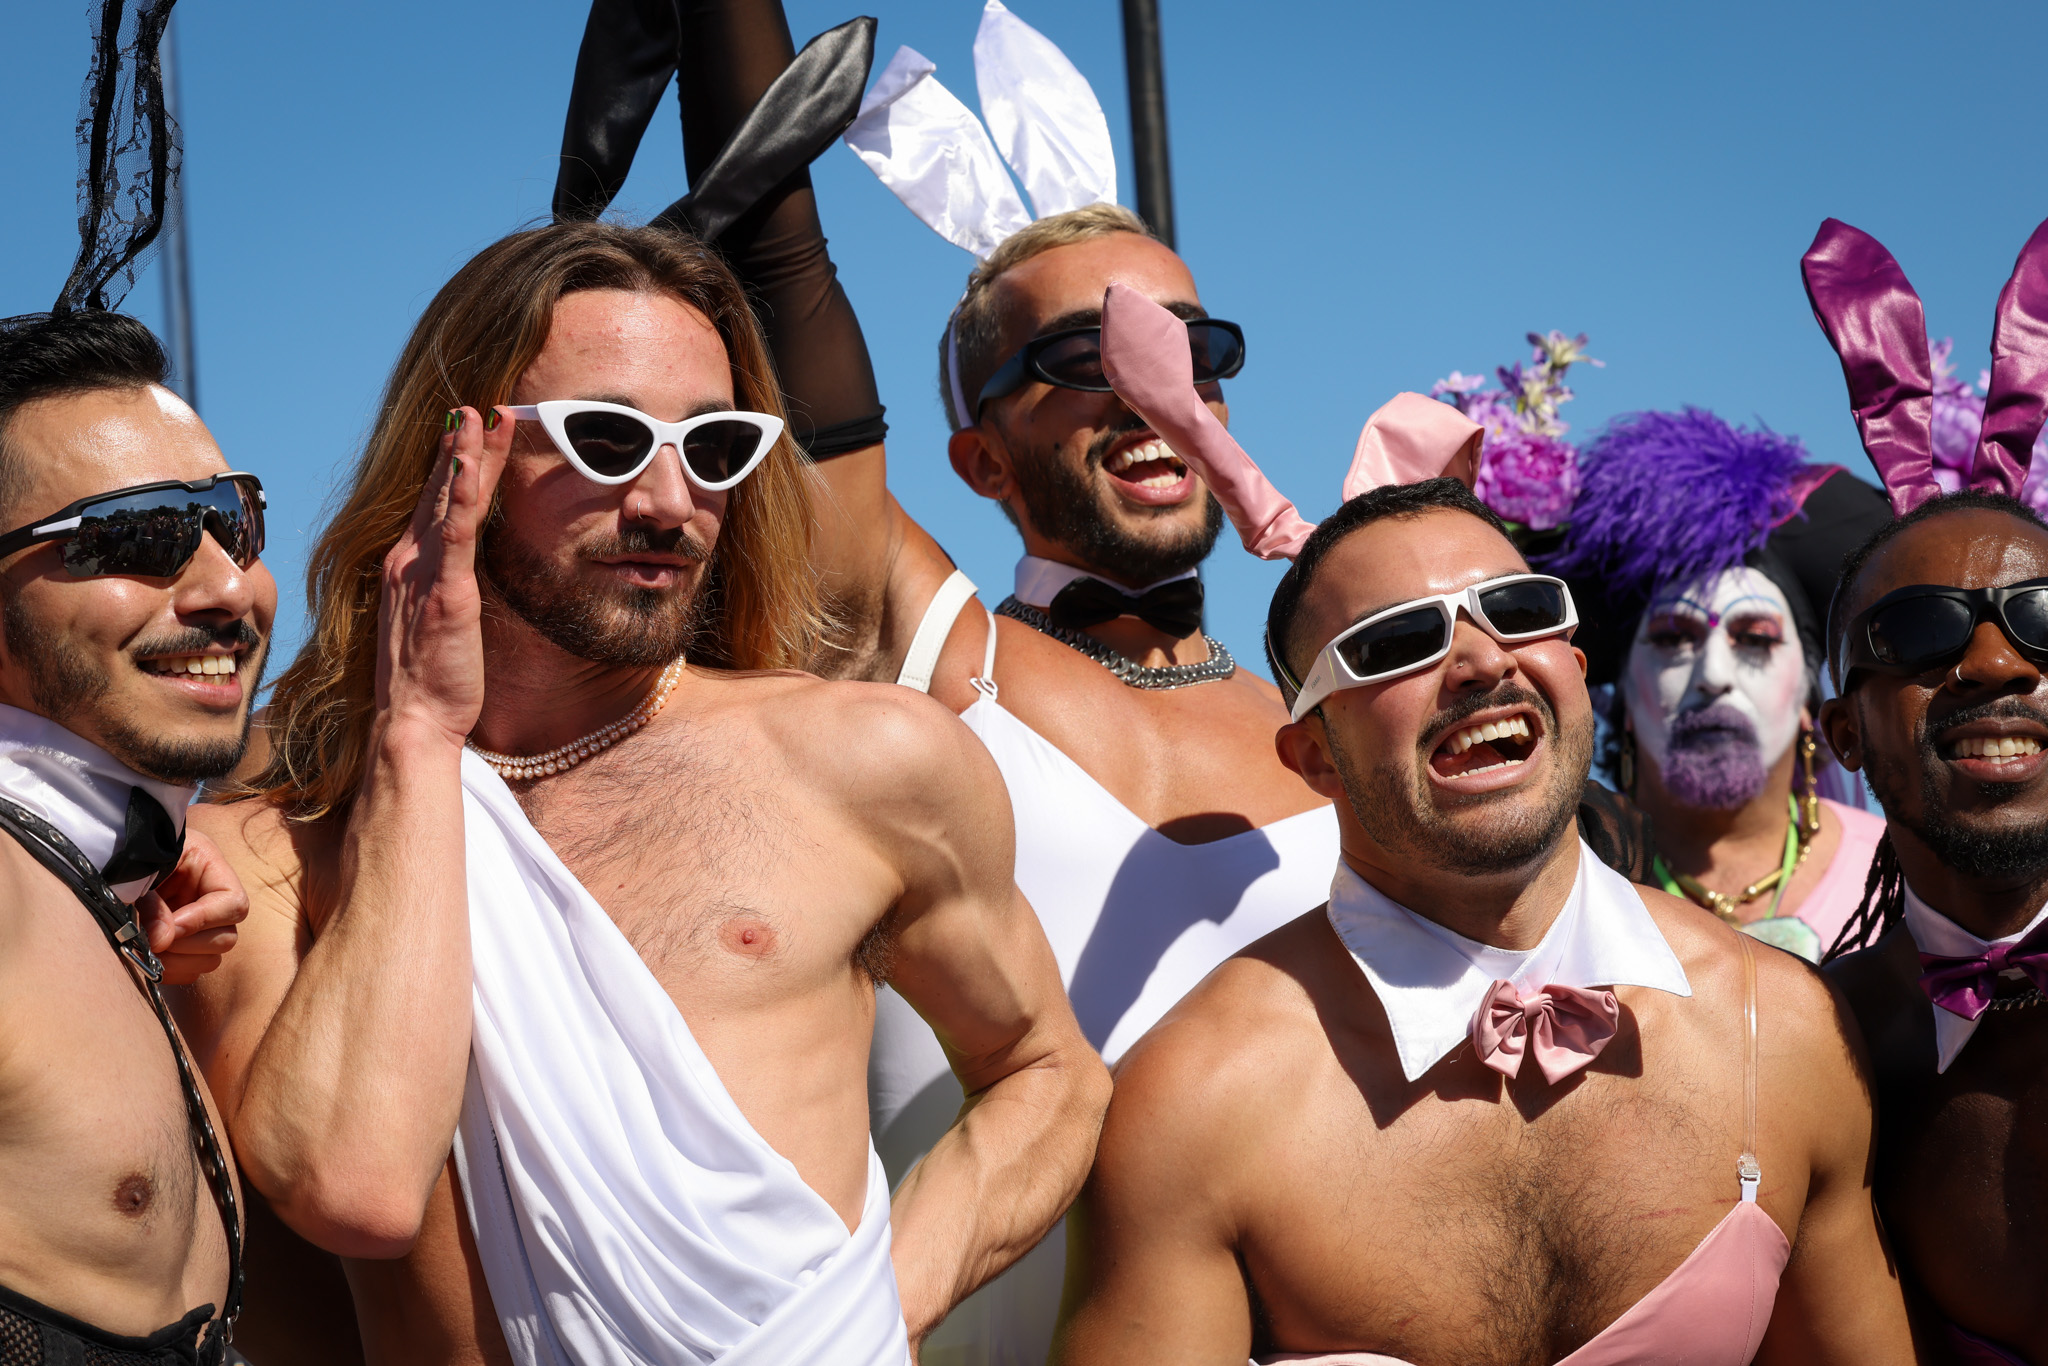 three shirtless smiling men in bunny ears, a toga, a prop collar and/or sunglasses pose looking upward outdoors